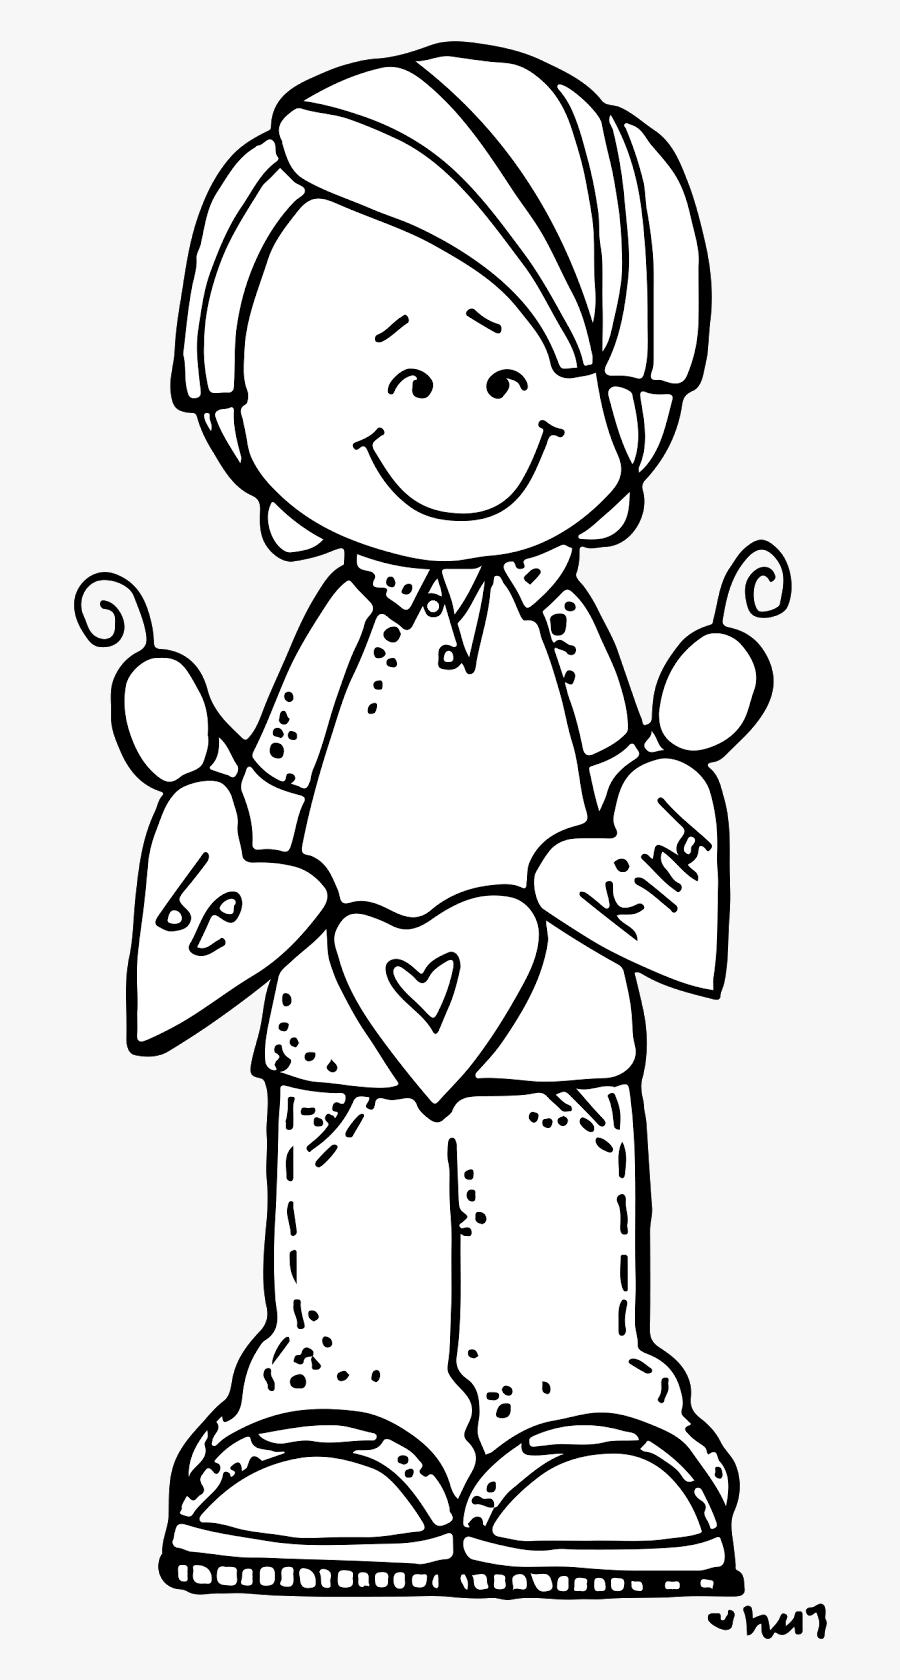 Kindness Black And White Clipart, Transparent Clipart